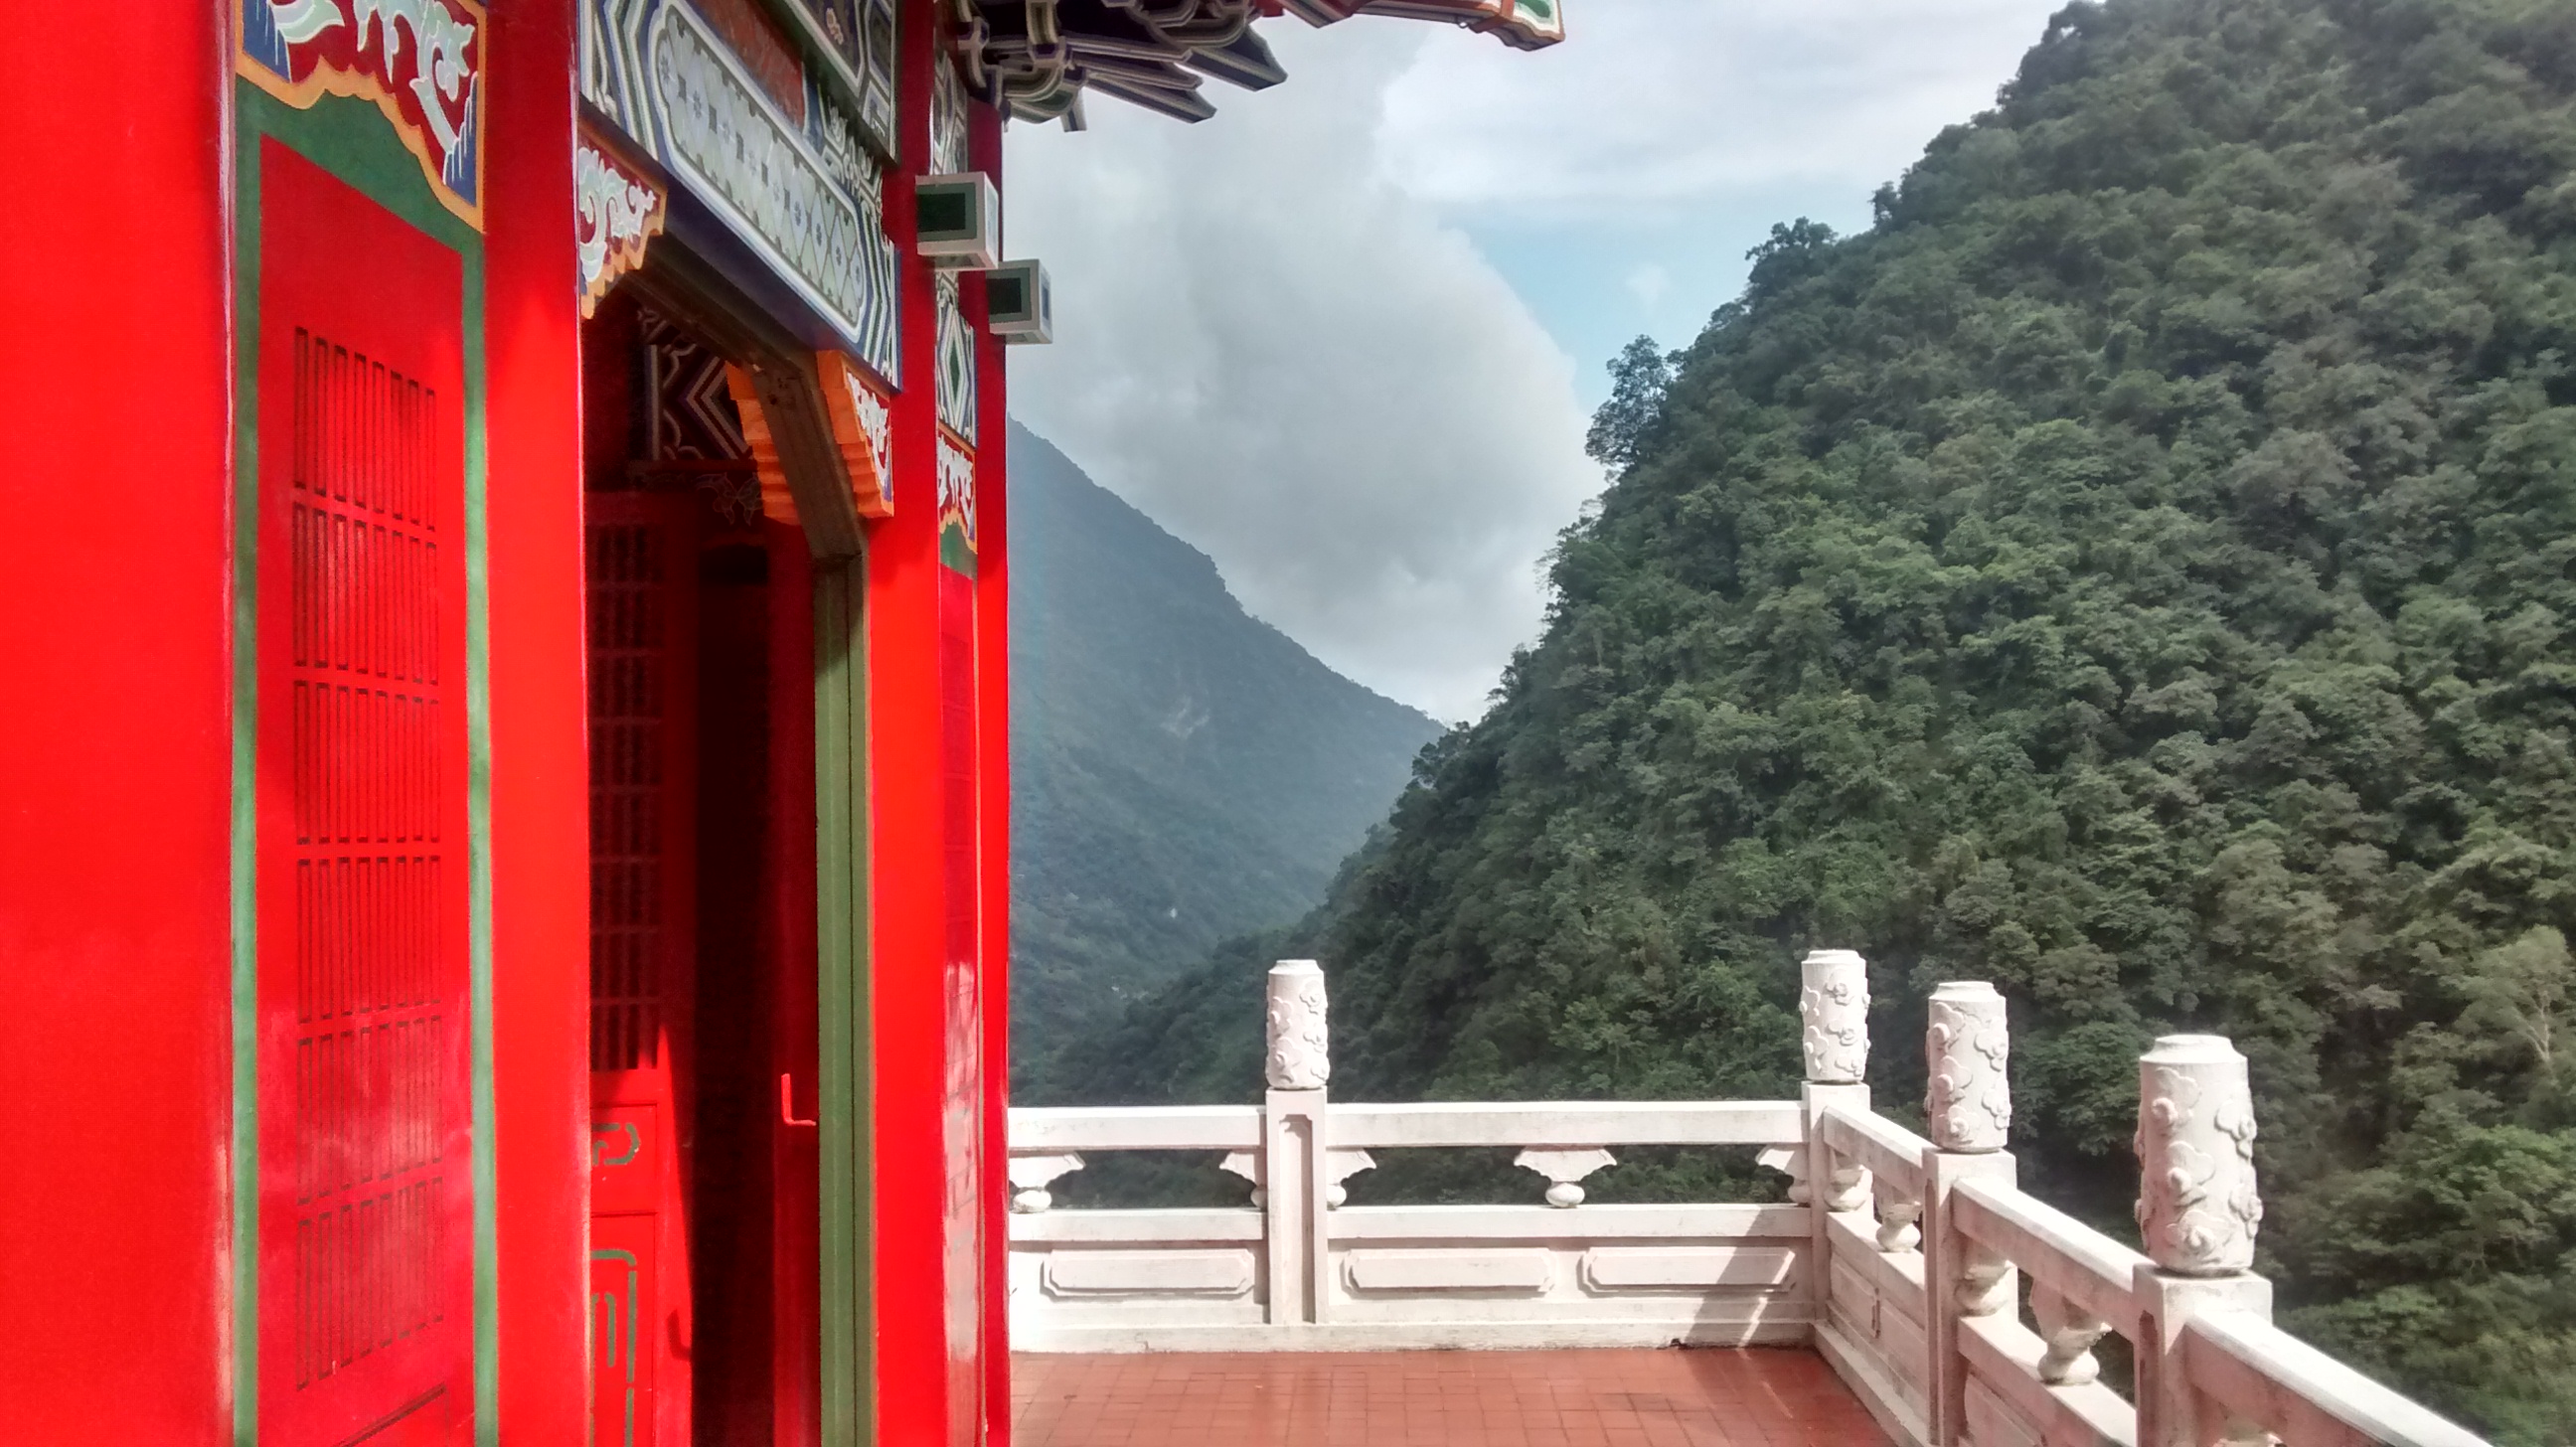 From a Buddhist Temple at Taroko
Gorge